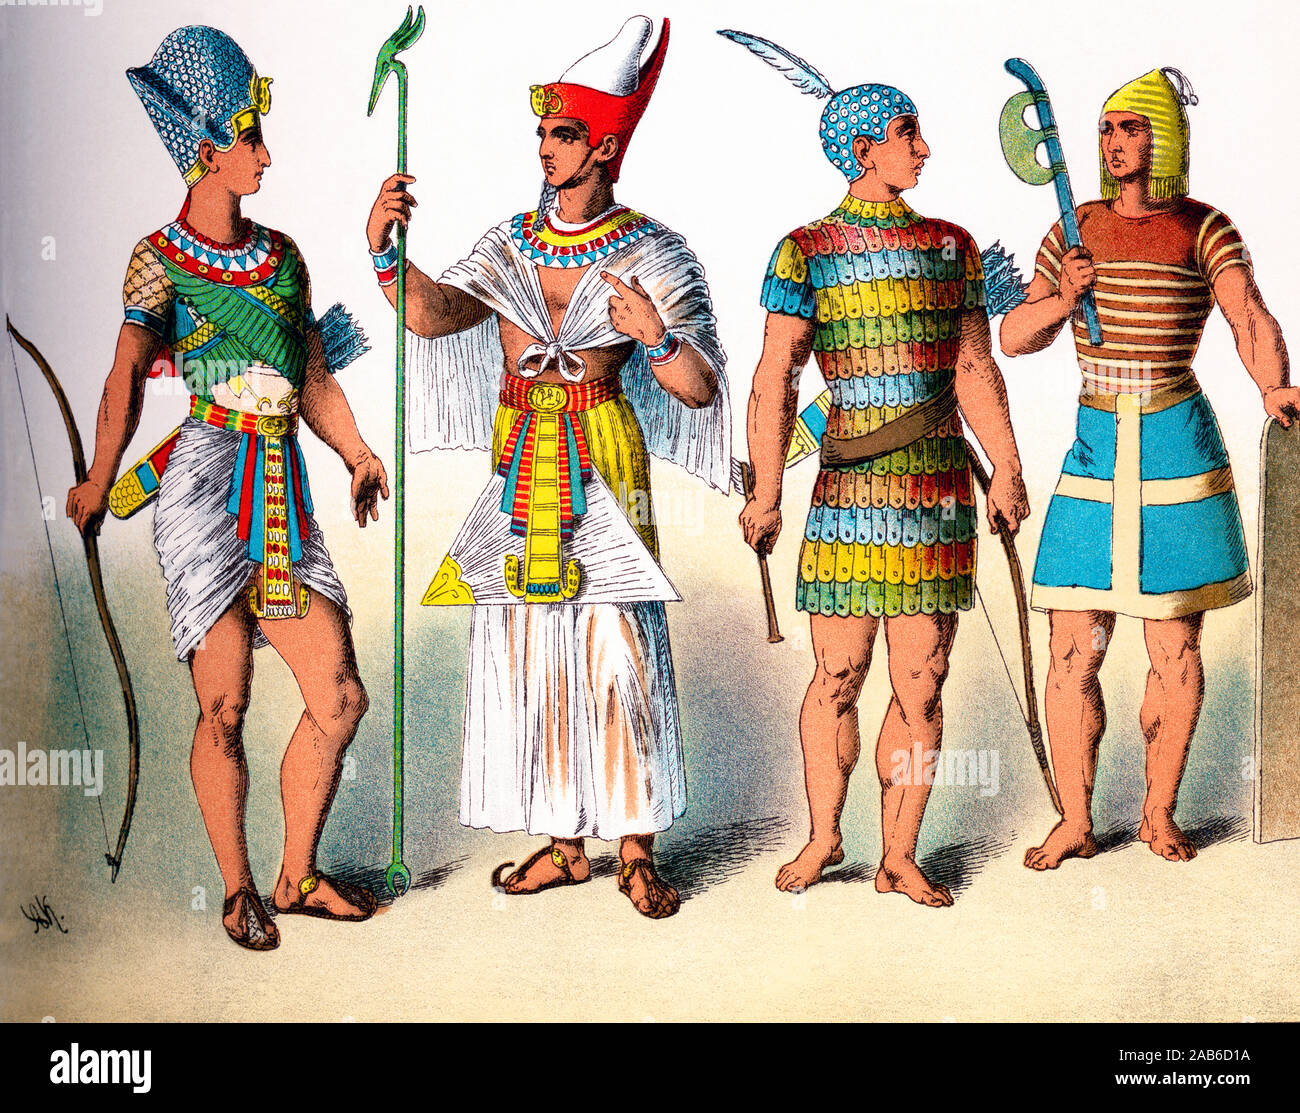 The figures represented here, from left to right, are an Egyptian pharaoh and three Egyptian warriors. The illustration dates to 1882. Stock Photo